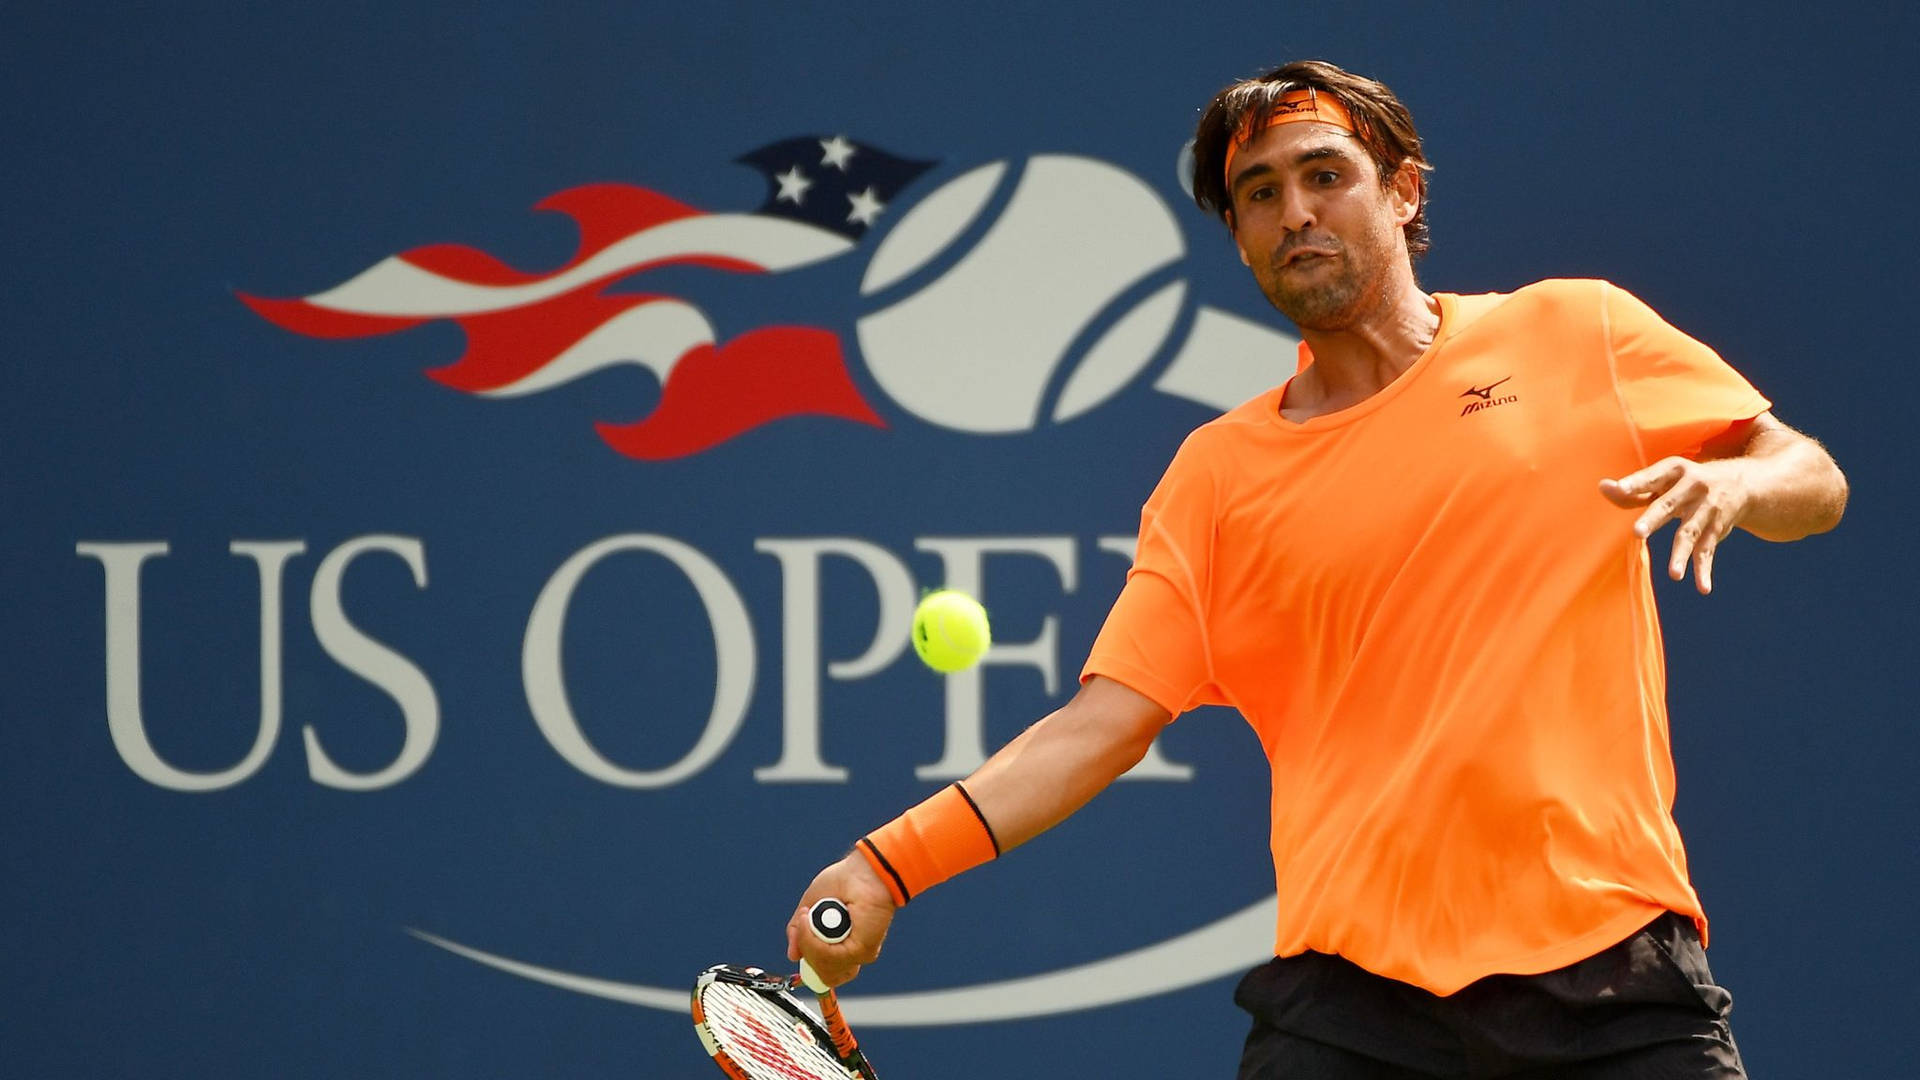 Caption: Marcos Baghdatis at the US Open tournament Wallpaper